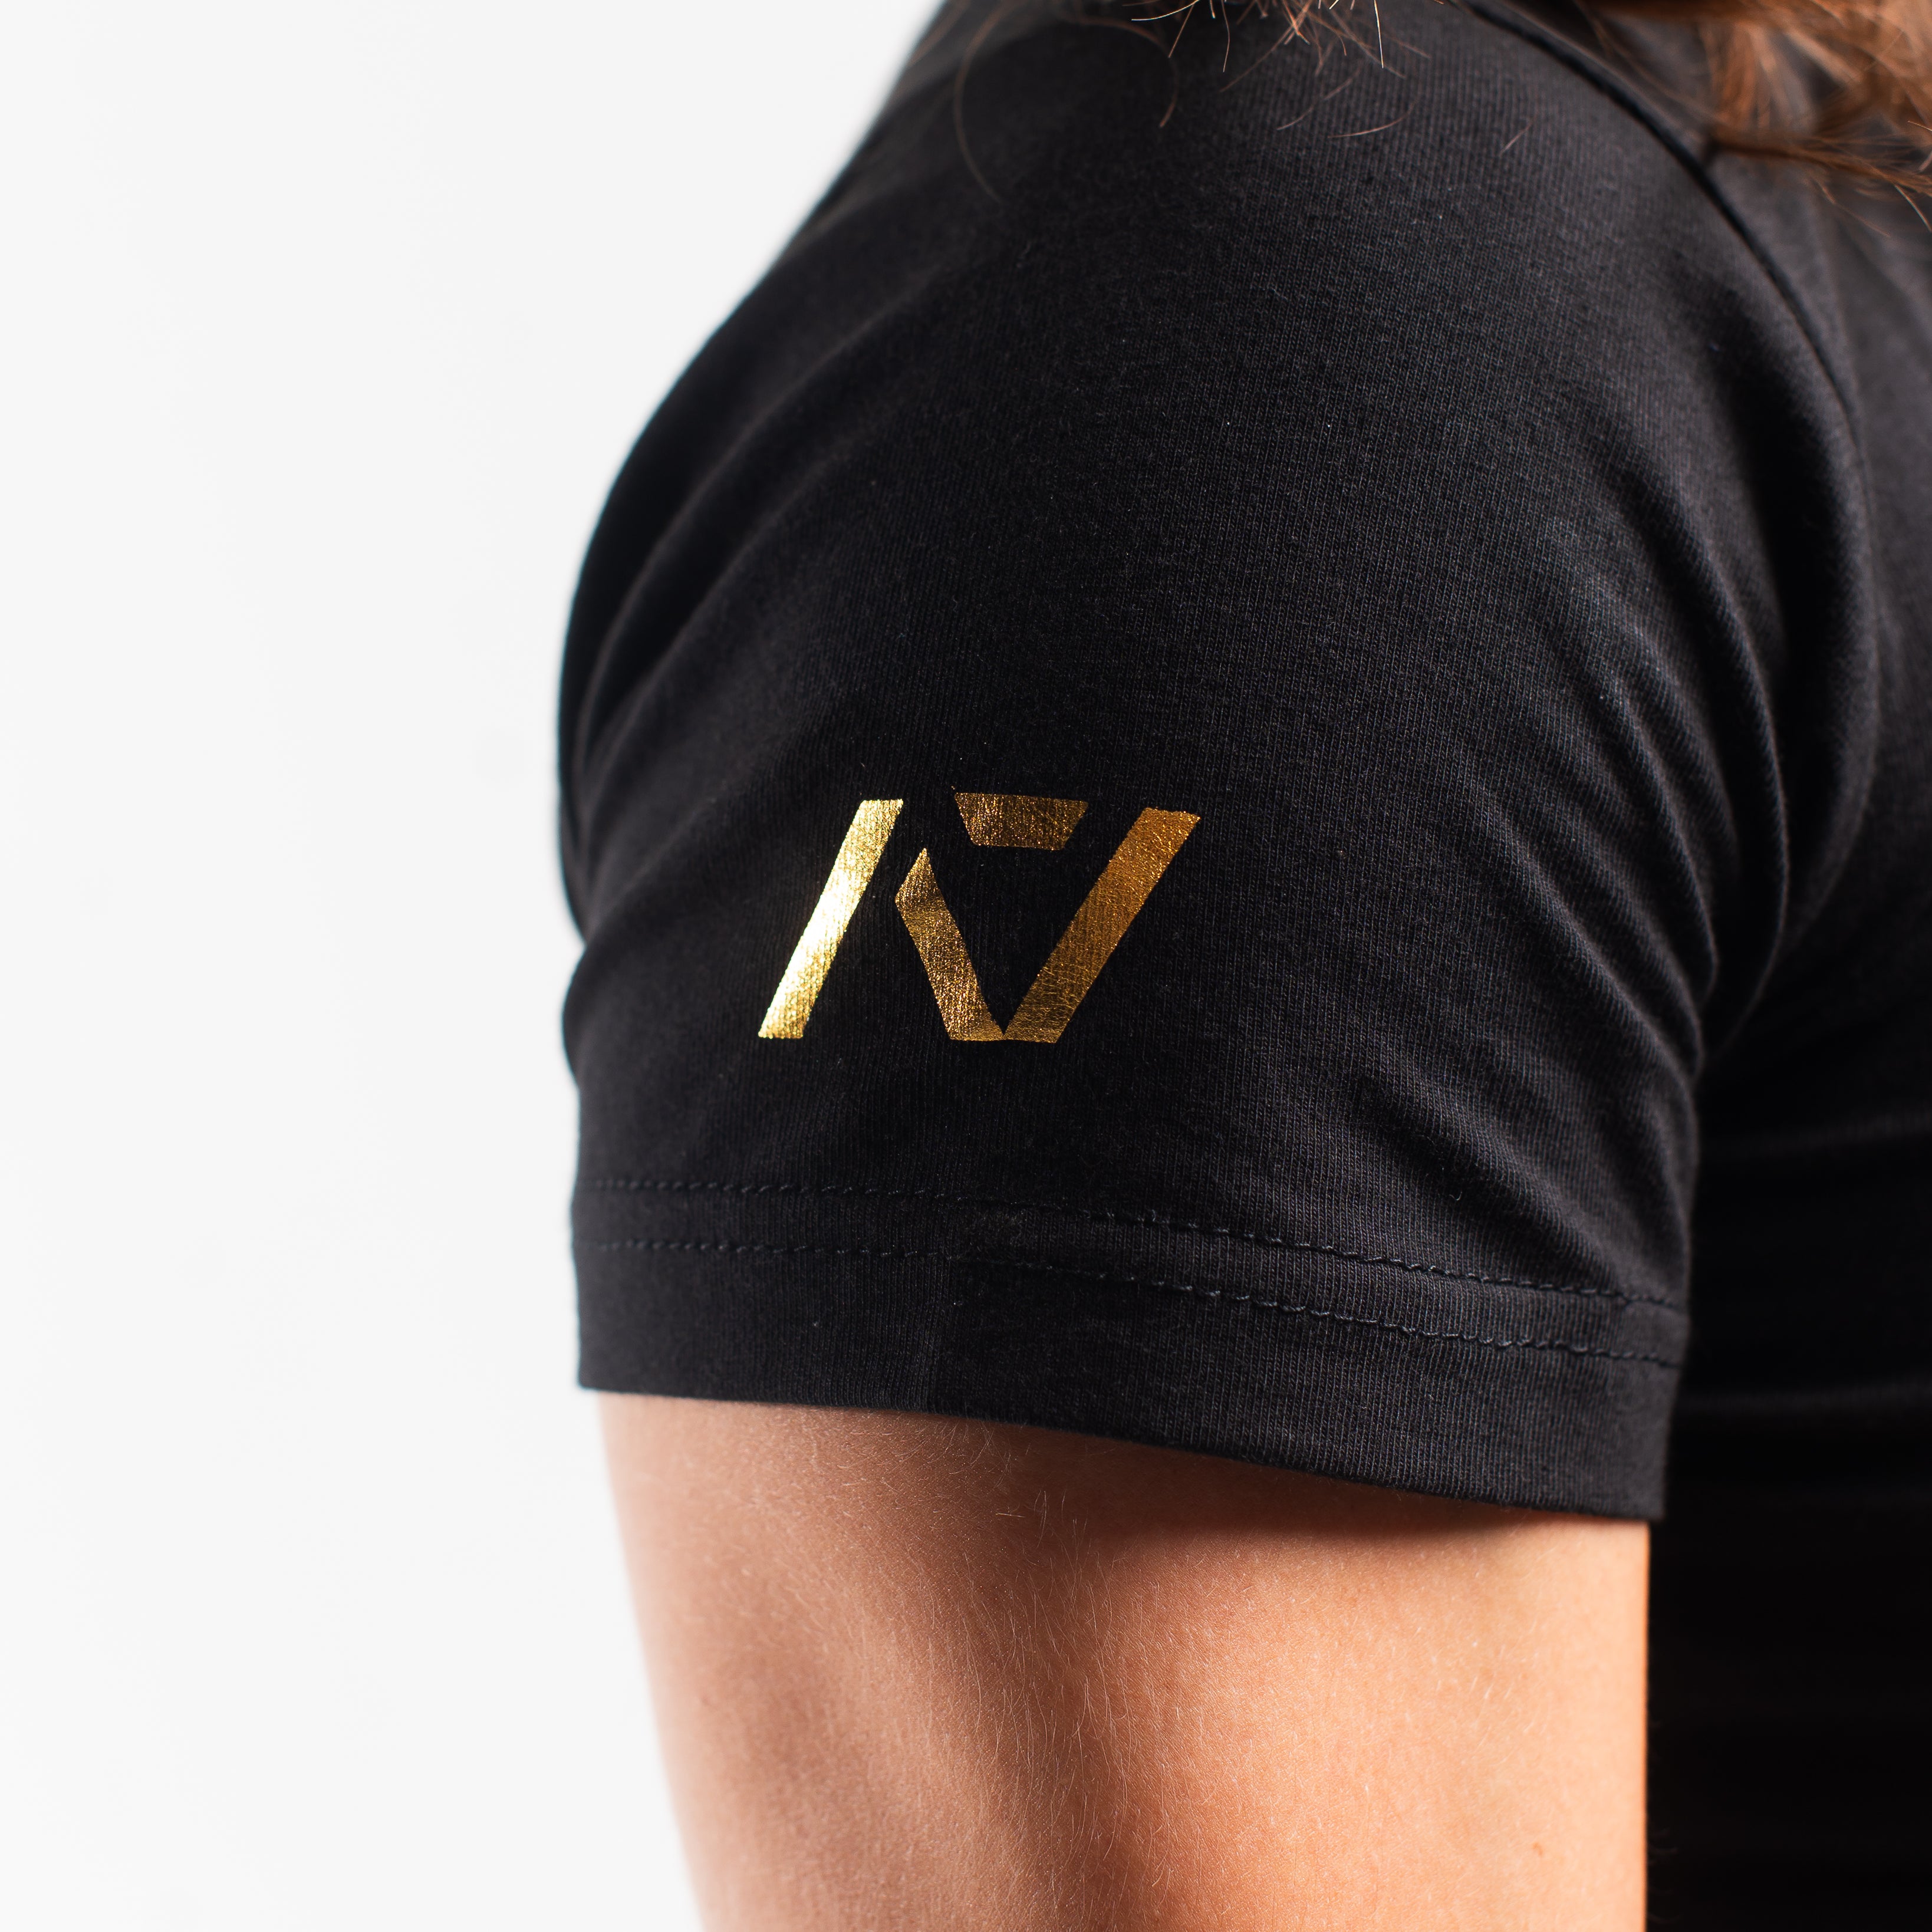 DG23 IPF Approved Meet Shirt Gold Standard is our new meet shirt with Demand Greatness with a double outline font to showcase your impact on the platform. Shop the full A7 Powerlifting IPF Approved Equipment collection including Powerlifting Singlet, A7 Meet Shirt, A7 Zebra Wrist Wraps, A7 Deadlift Socks, Hourglass Knee Sleeves (Stiff Knee Sleeves and Rigor Mortis Knee Sleeves). PAL Lever is now IPF Approved. Genouillères powerlifting shipping to France, Spain, Ireland, Germany, Italy, Sweden and EU.